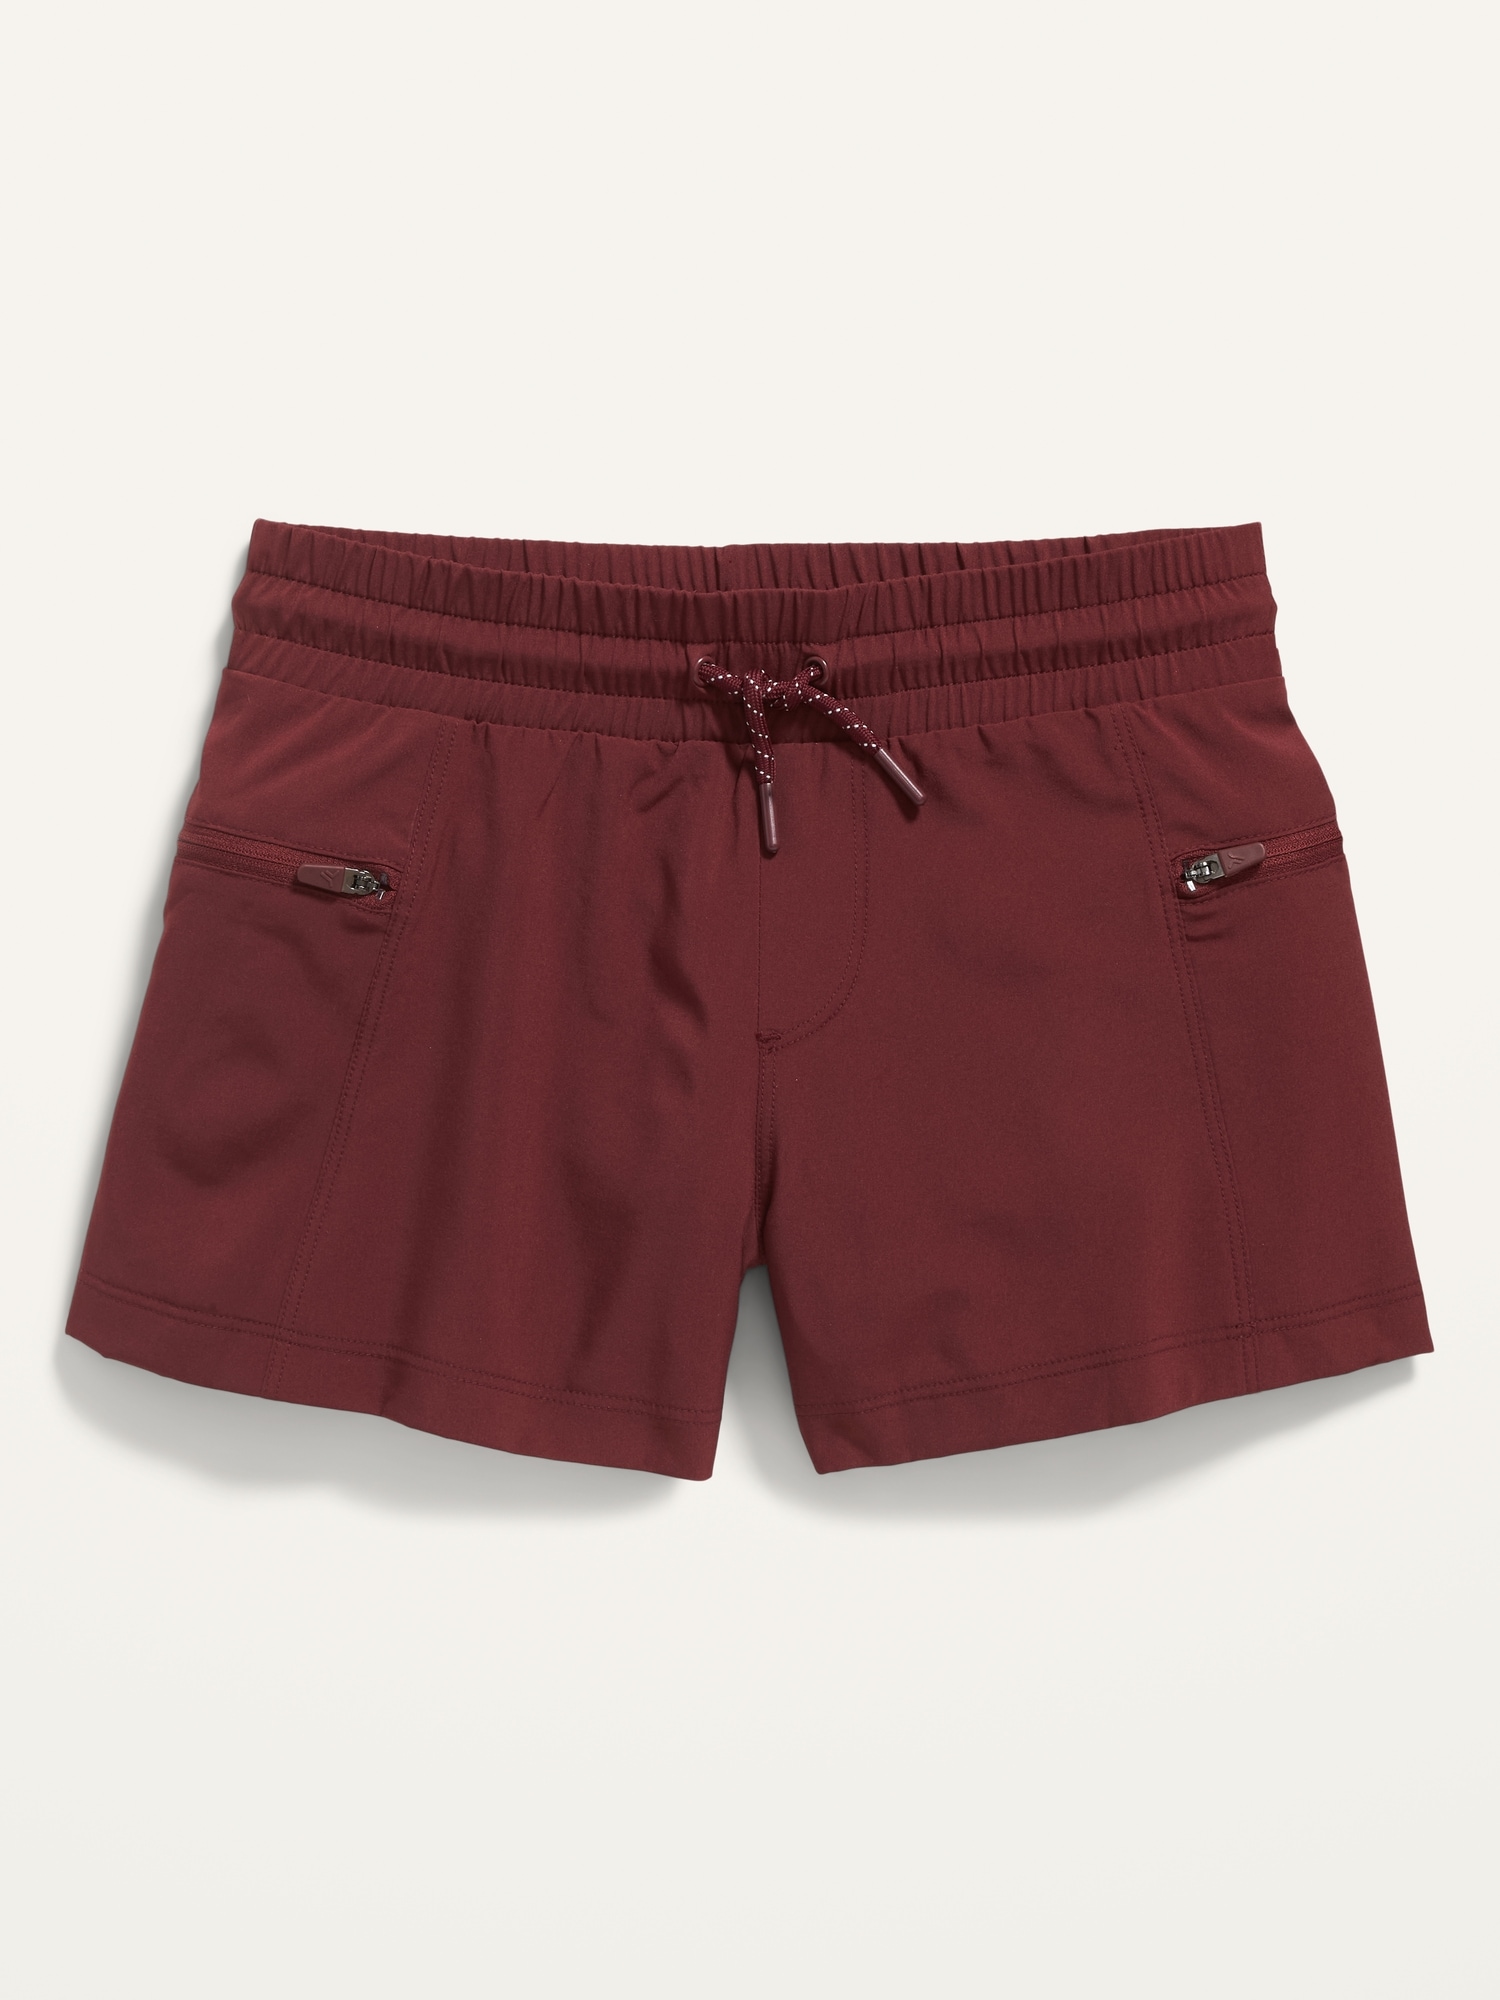 Old Navy - High-Waisted StretchTech Zip-Pocket Performance Shorts